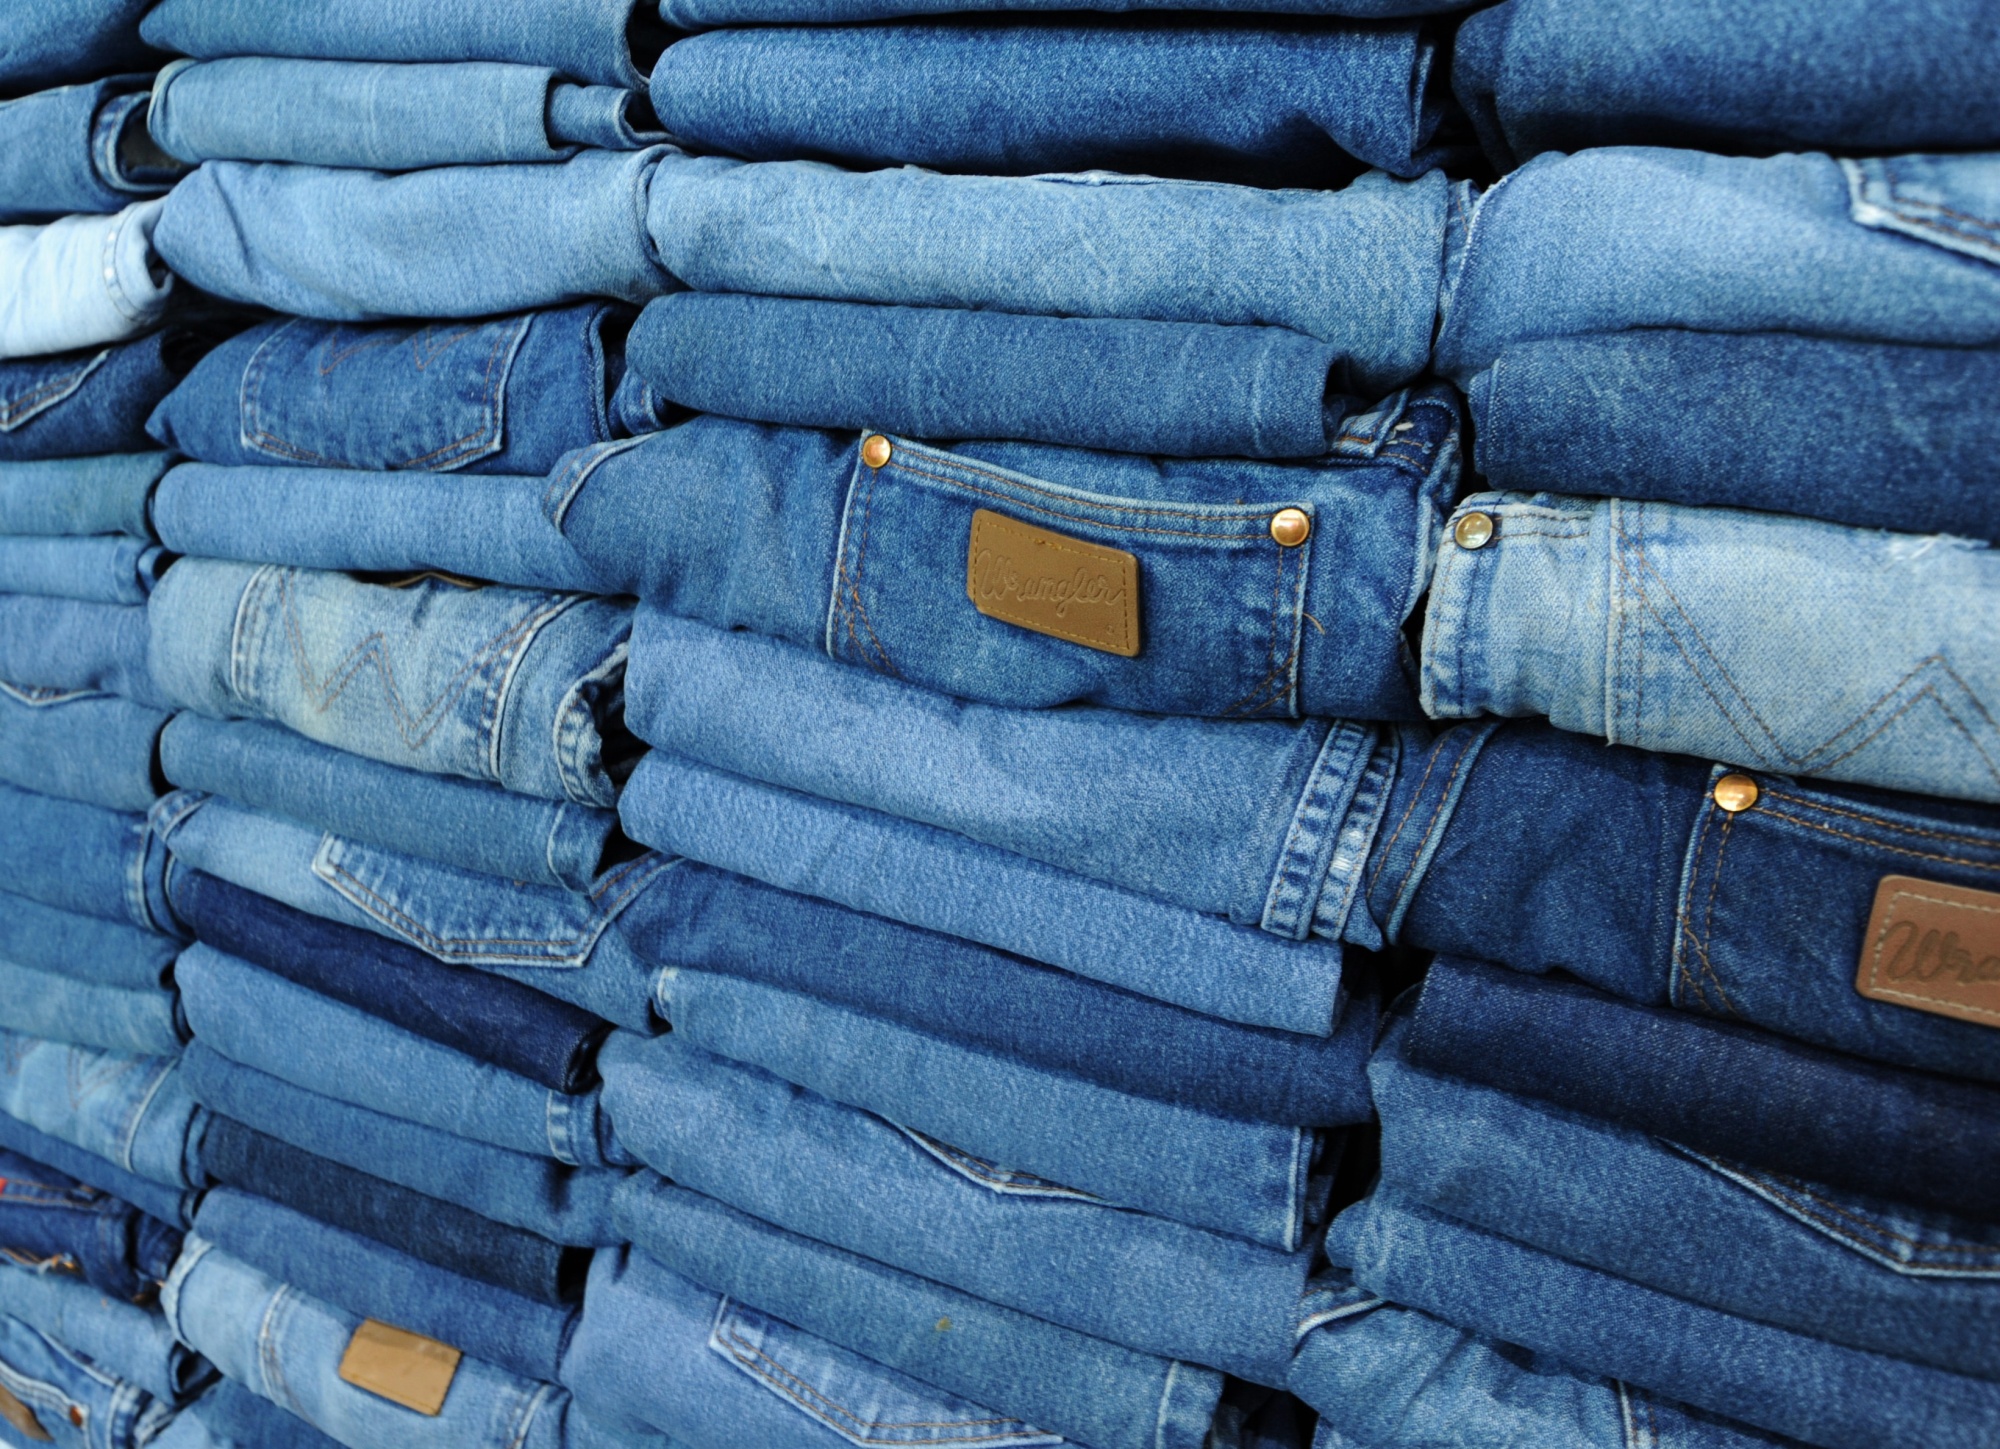 Denim CEO Says Dress Pants Aren’t Coming Back After Covid-19 - Bloomberg